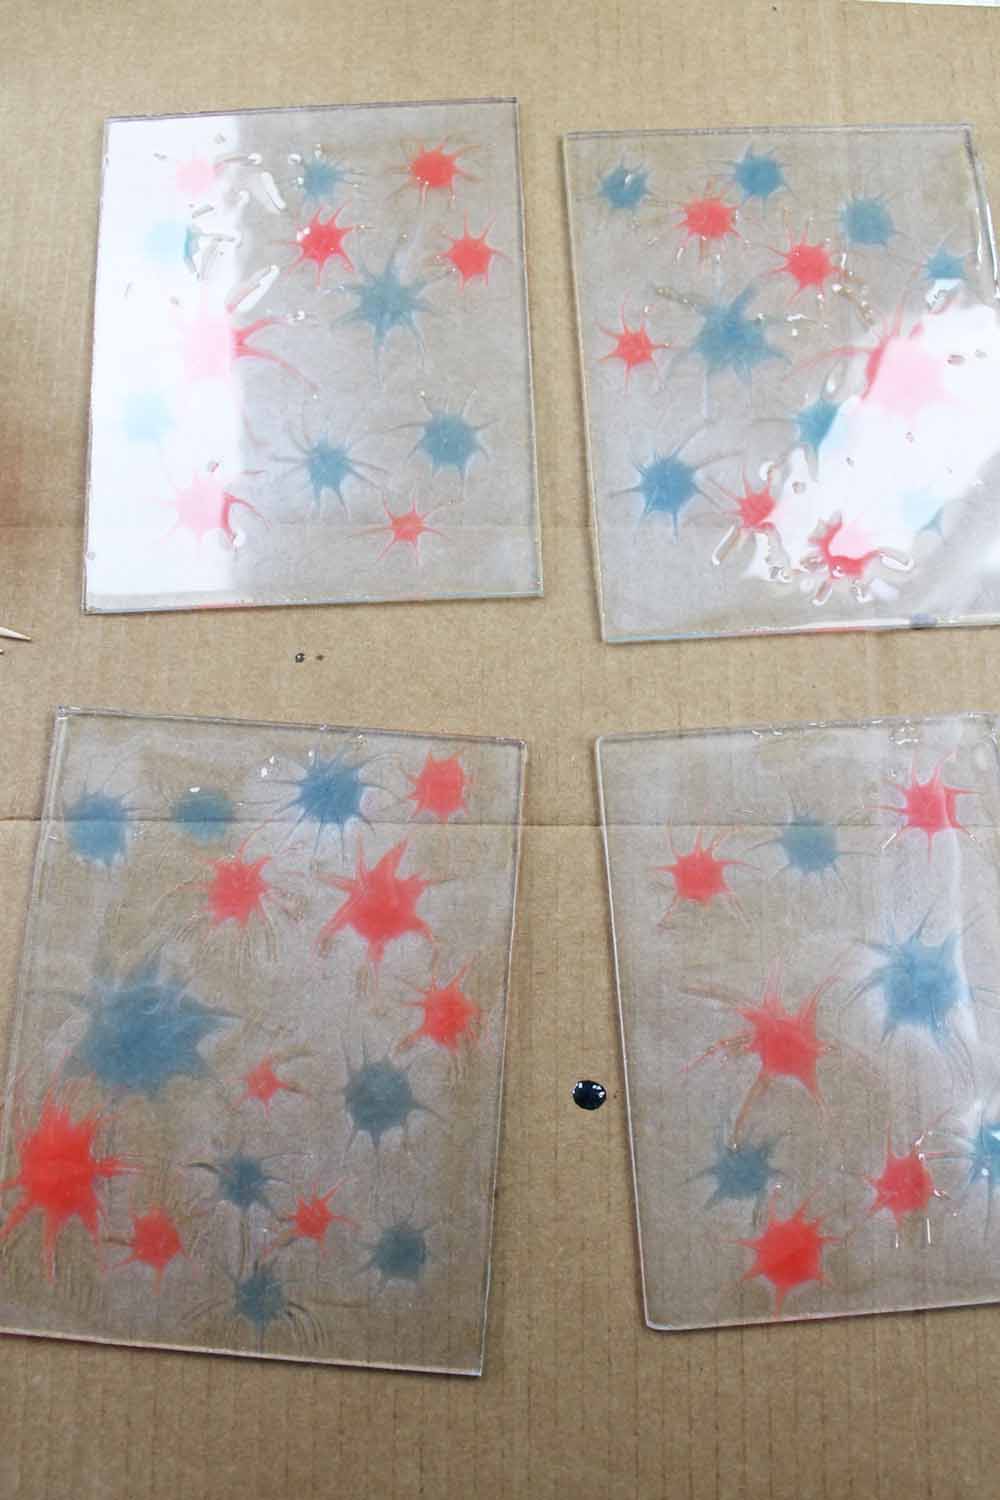 fireworks pattern on glass panes from resin